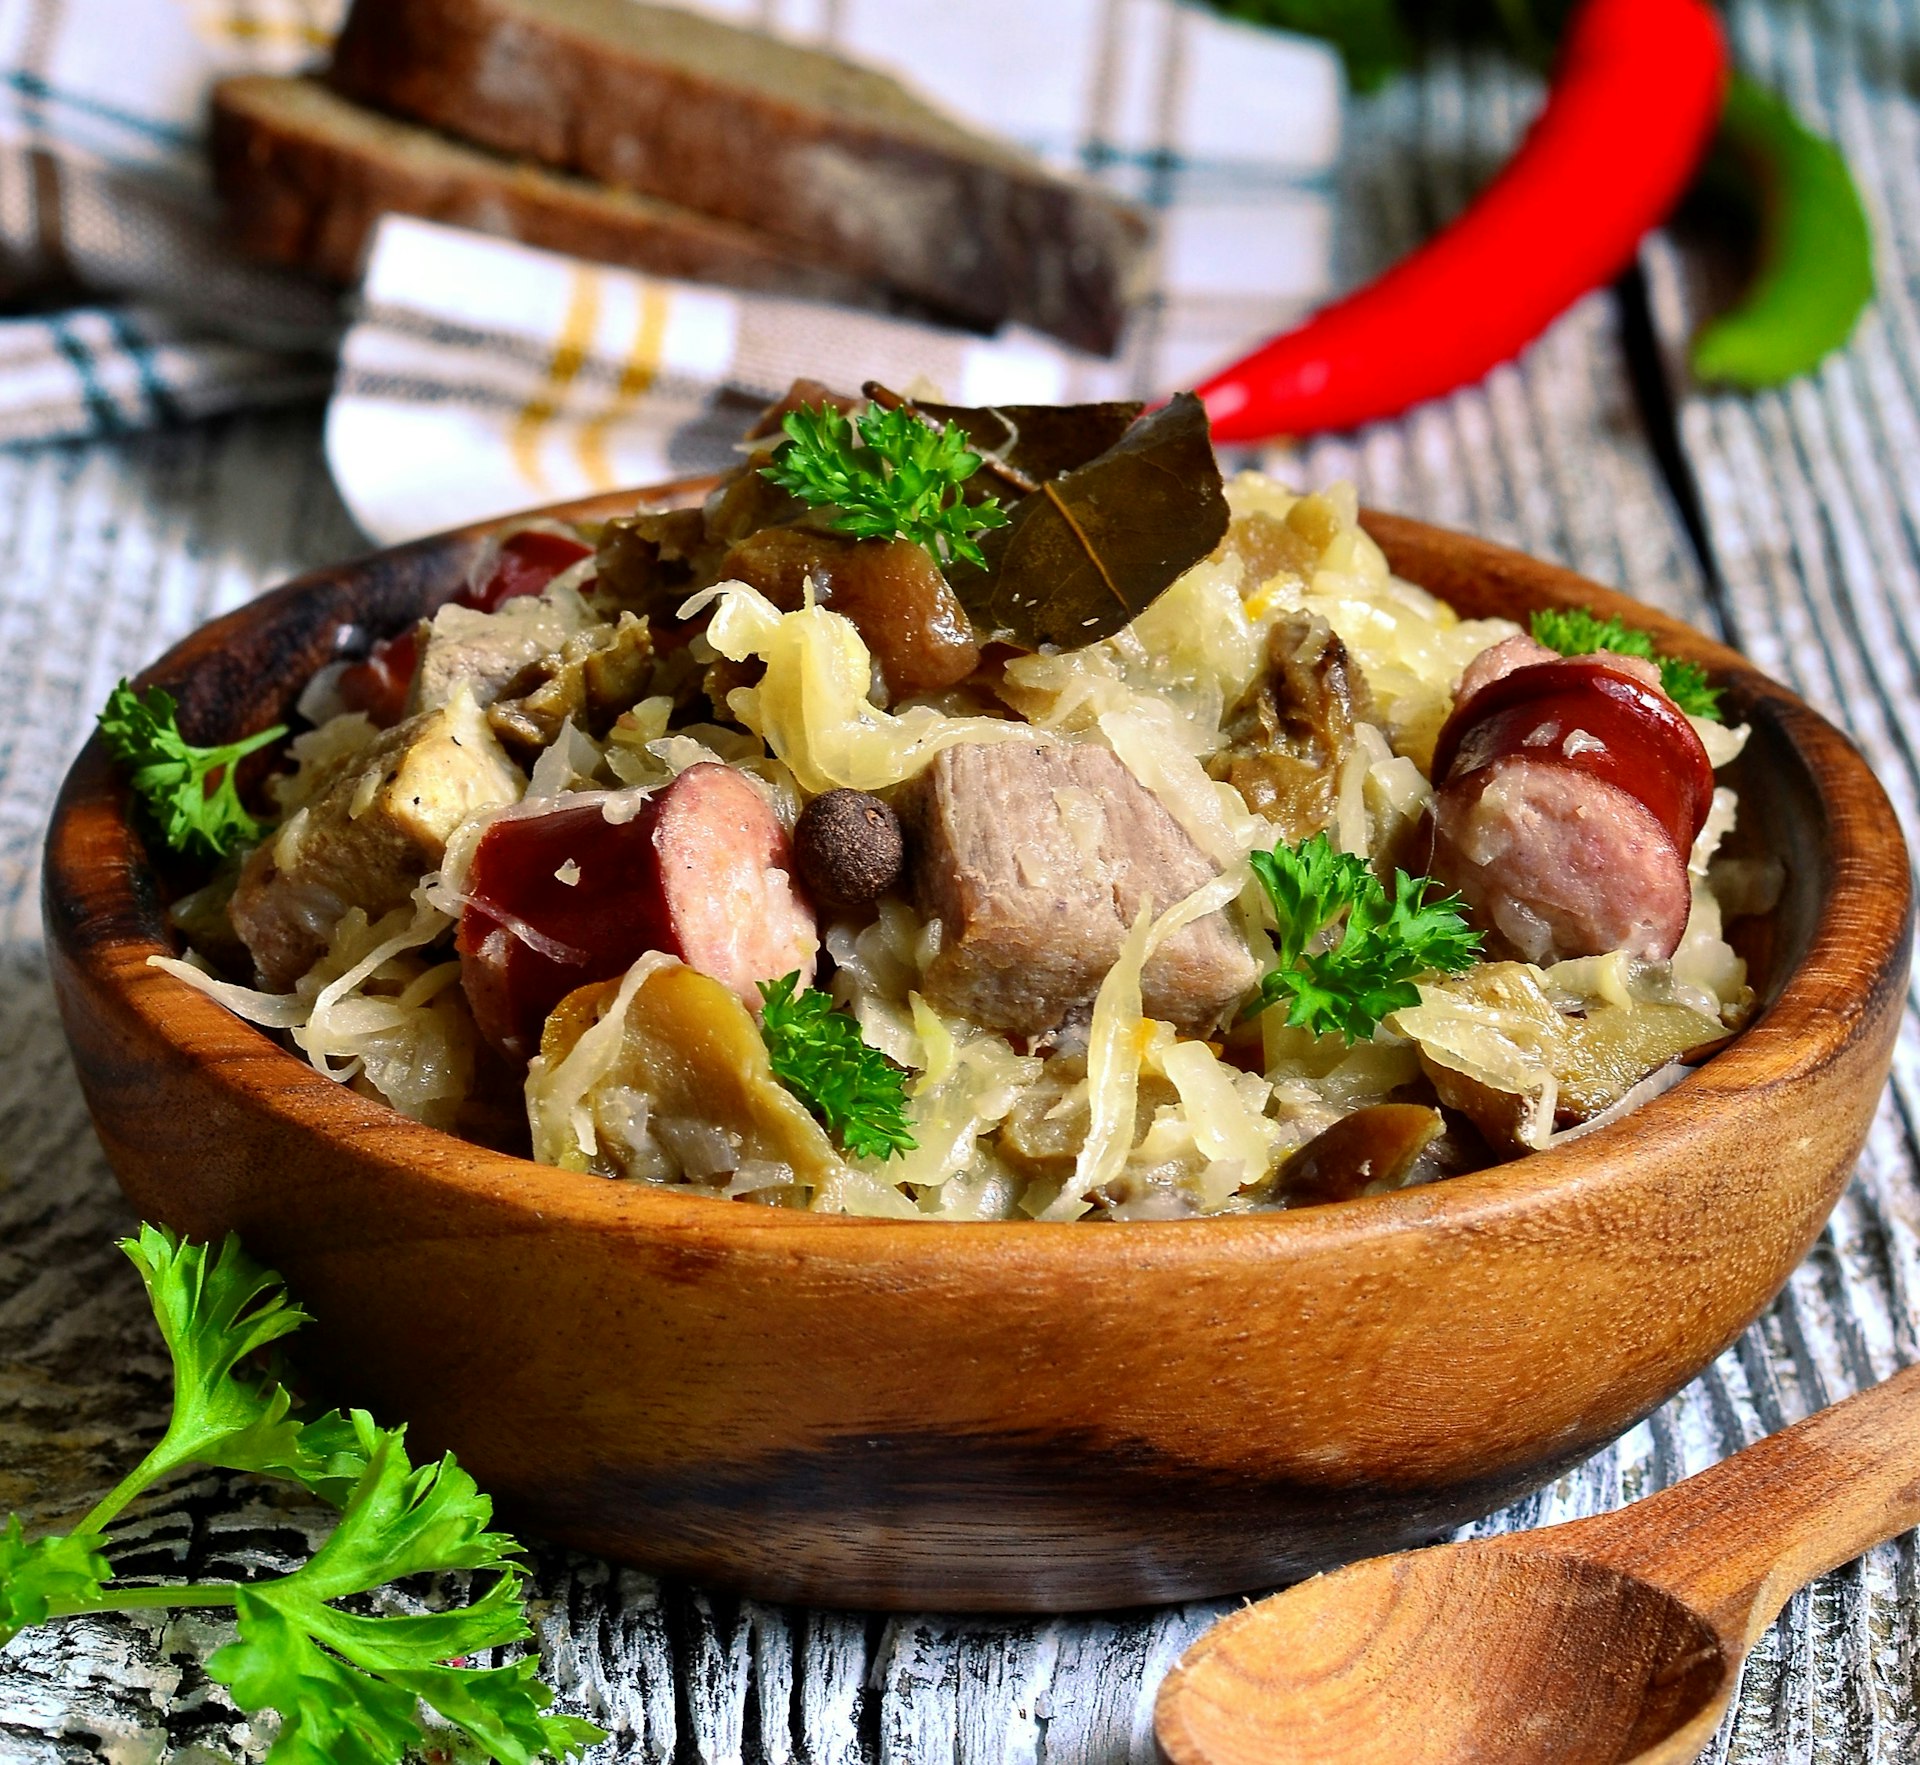 A bowl of Polish bigos from a side on view. The dish contains vegetables and meat in a broth.